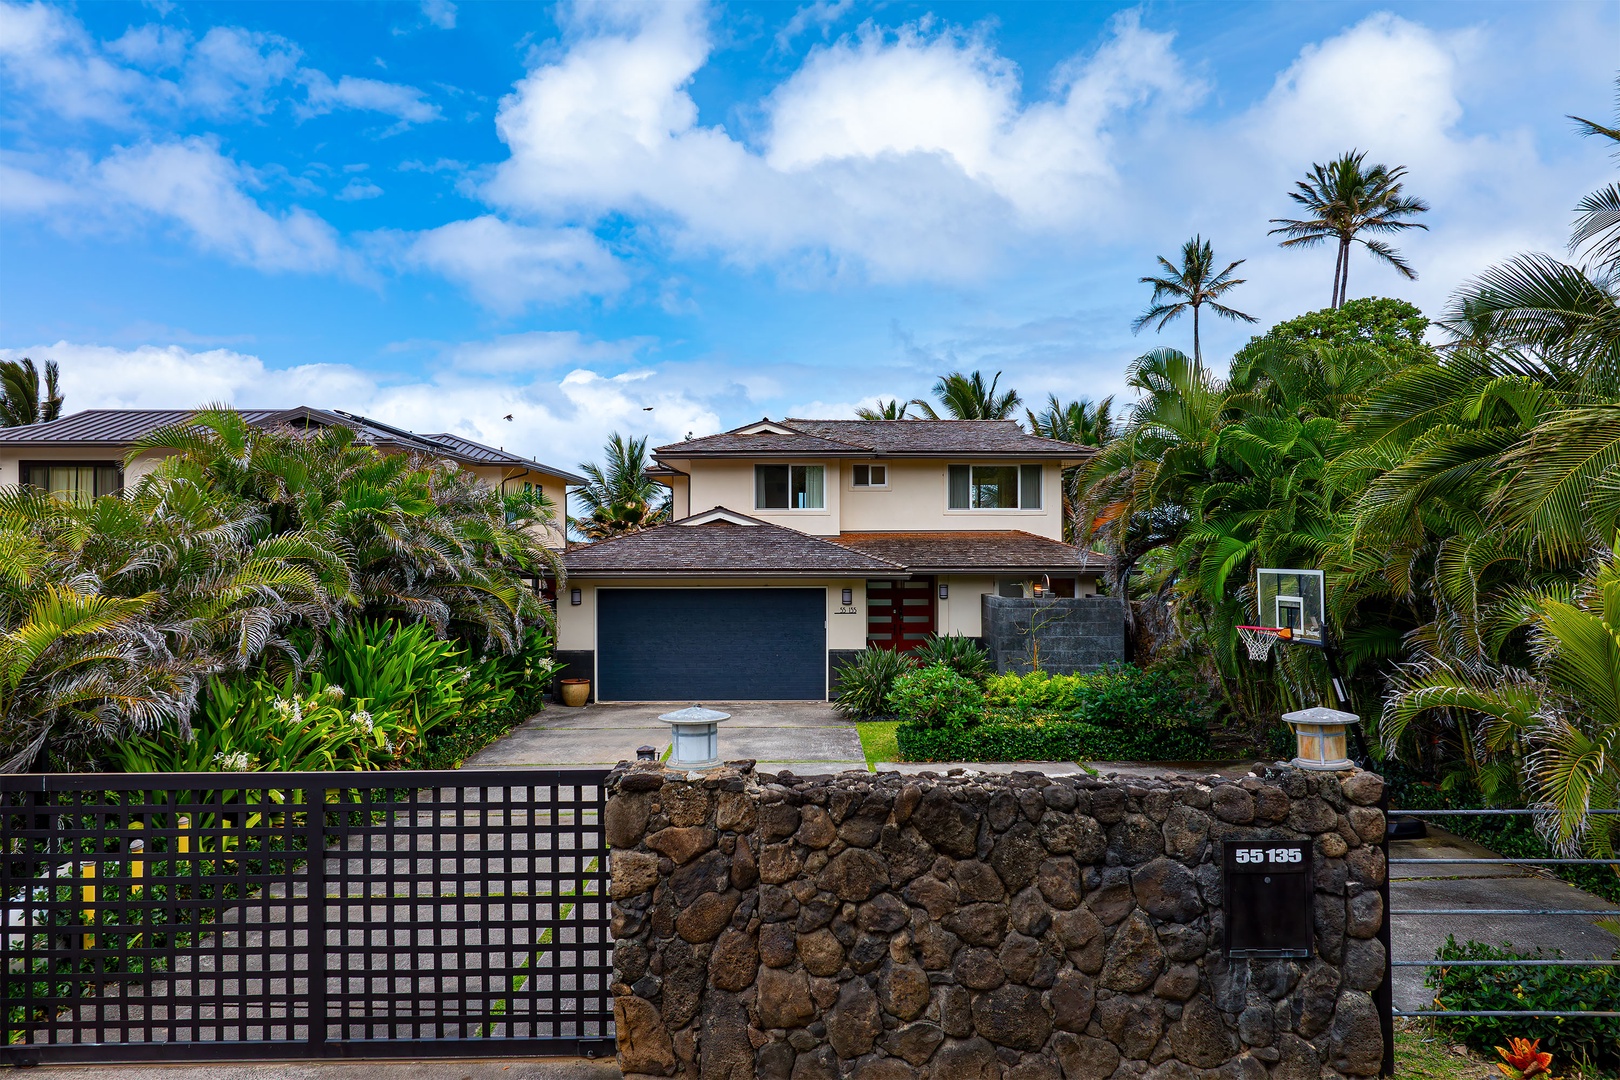 Laie Vacation Rentals, Laie Beachfront Estate - Covered garage and ample parking space.